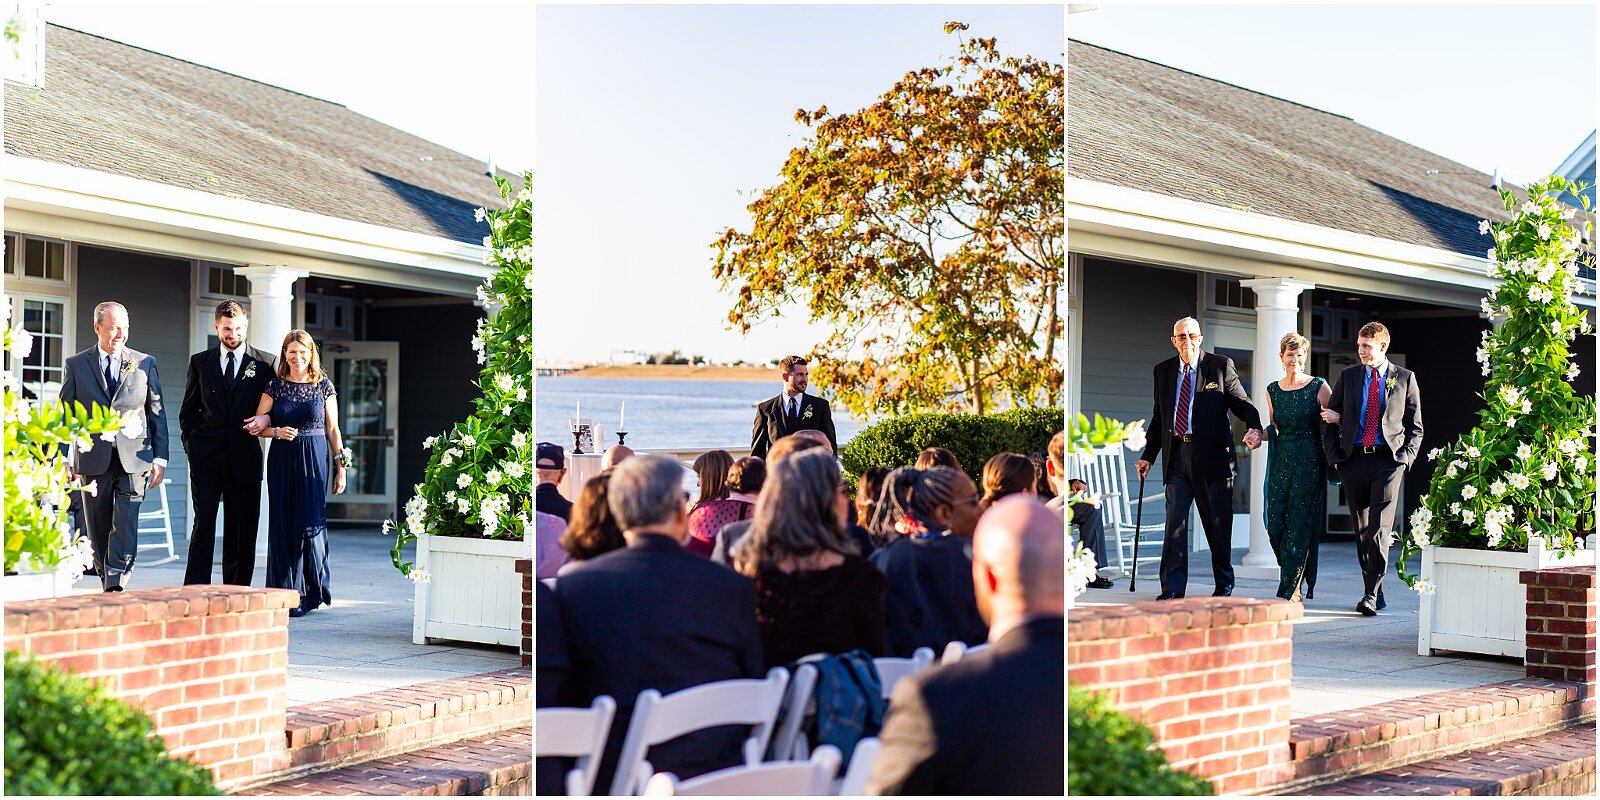 Nicki and Jordan’s sunset wedding took place just across the Bay Bridge, at the Chesapeake Bay Beach Club! I don’t usually travel to Maryland for weddings, but when I do, they’re breathtaking! This wedding was FULL of funny stories, goofy groomsmen, a funny wedding blunder, and suspenders! Photo by Bethanie Vetter Photography LLC, second shot for Elizabeth M. Photography #Marylandwedding #marylandbride #bhldndress #bhldnbride #chesapeakebay #chesapeakbaywedding #chesapeakebaybeachclub #beachwedding #beachclubwedding #weddingphotographer #bethanievetterphotography #bethanievetterweddings #eastcoastphotography #eastcoast #eastcoastphotographer